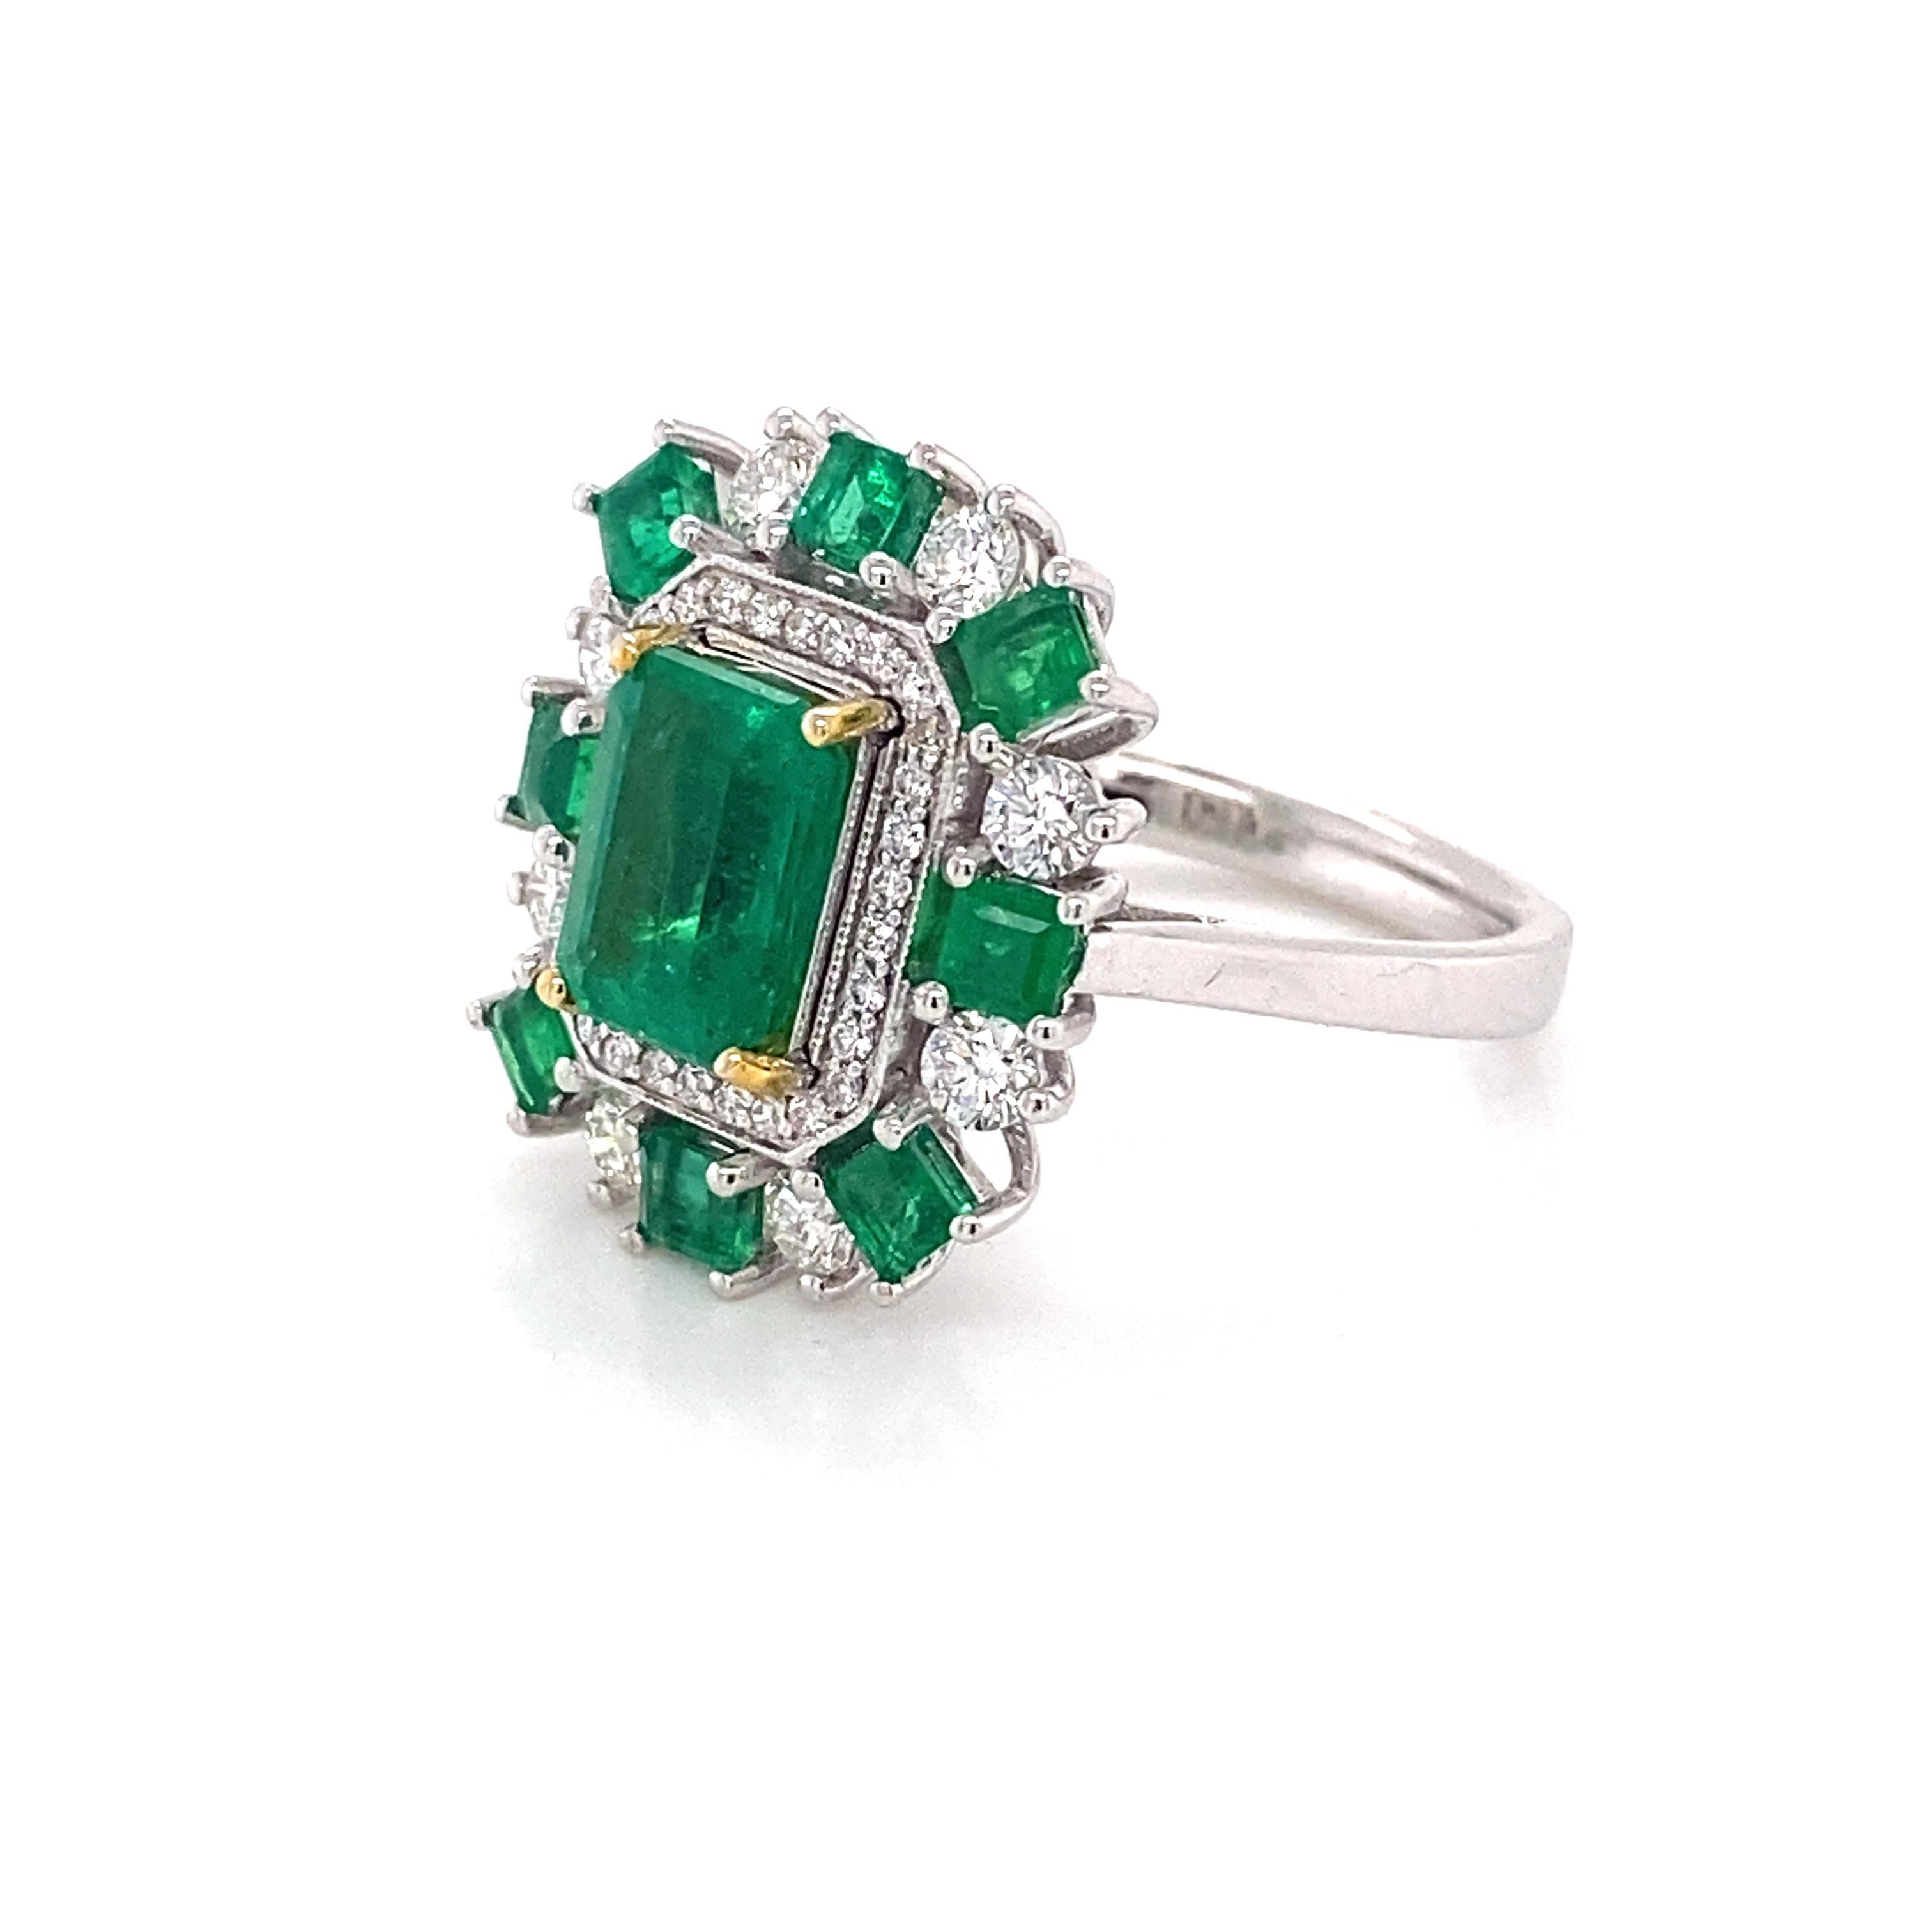 A remarkable setting of emeralds and diamonds set in 18k white gold. The center emerald is emerald cut with an alluring green hue. The additional square cut emeralds are perfectly color matched and together, with the center stone, weigh